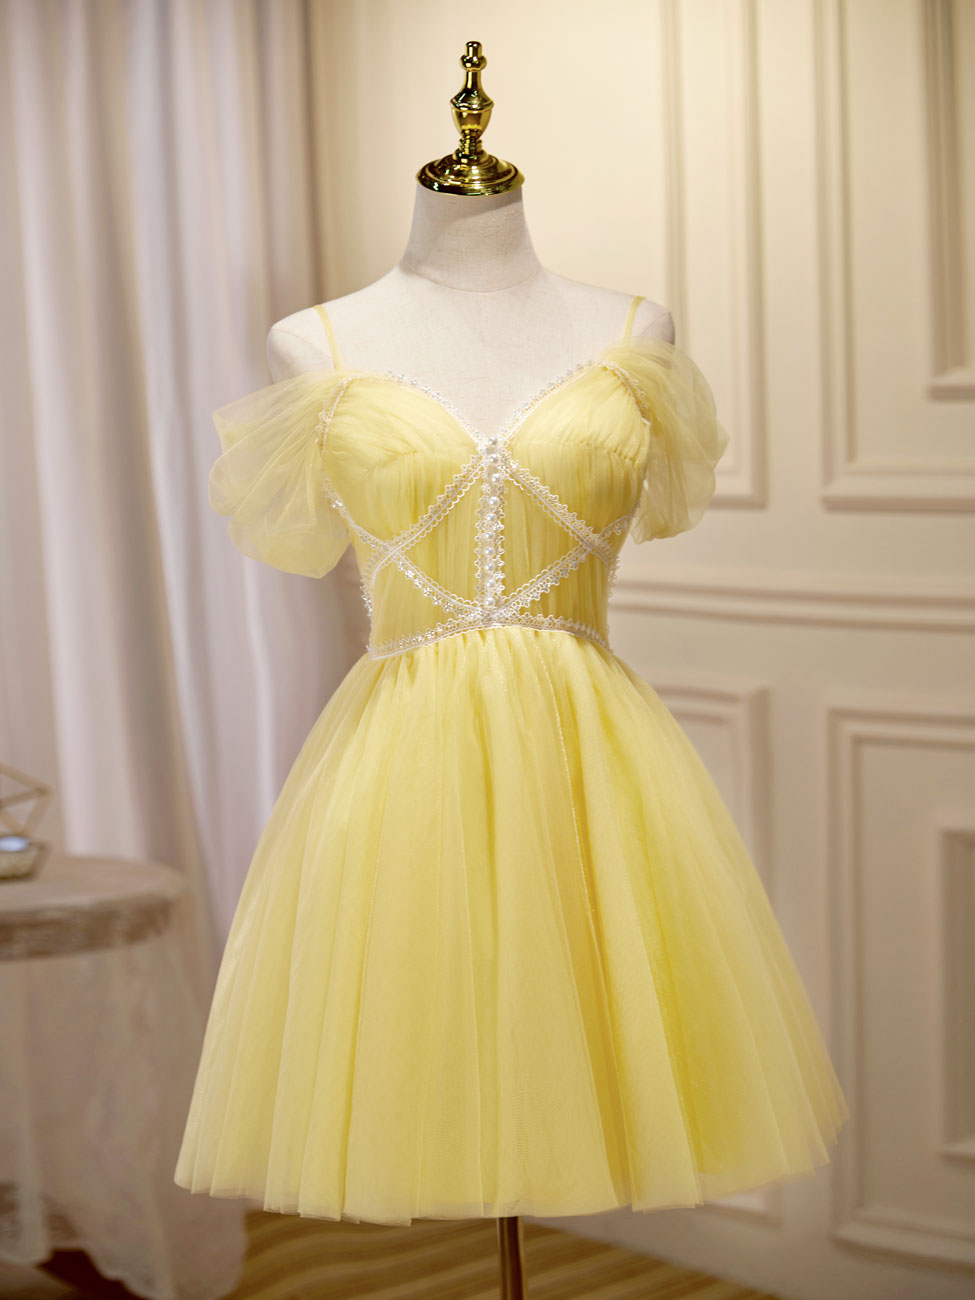 Bridesmaids Dress Under 111, Mini/Short Yellow Prom Dresses, Yellow Cute Homecoming Dress With Beading Lace